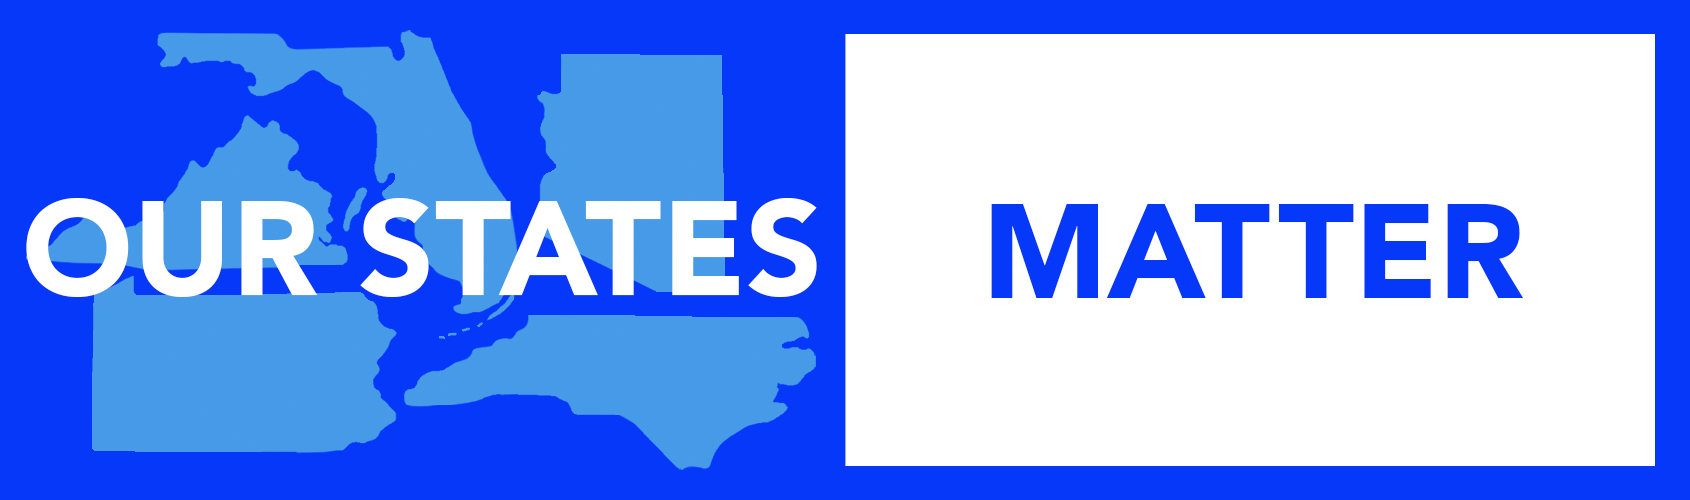 Our States Matter